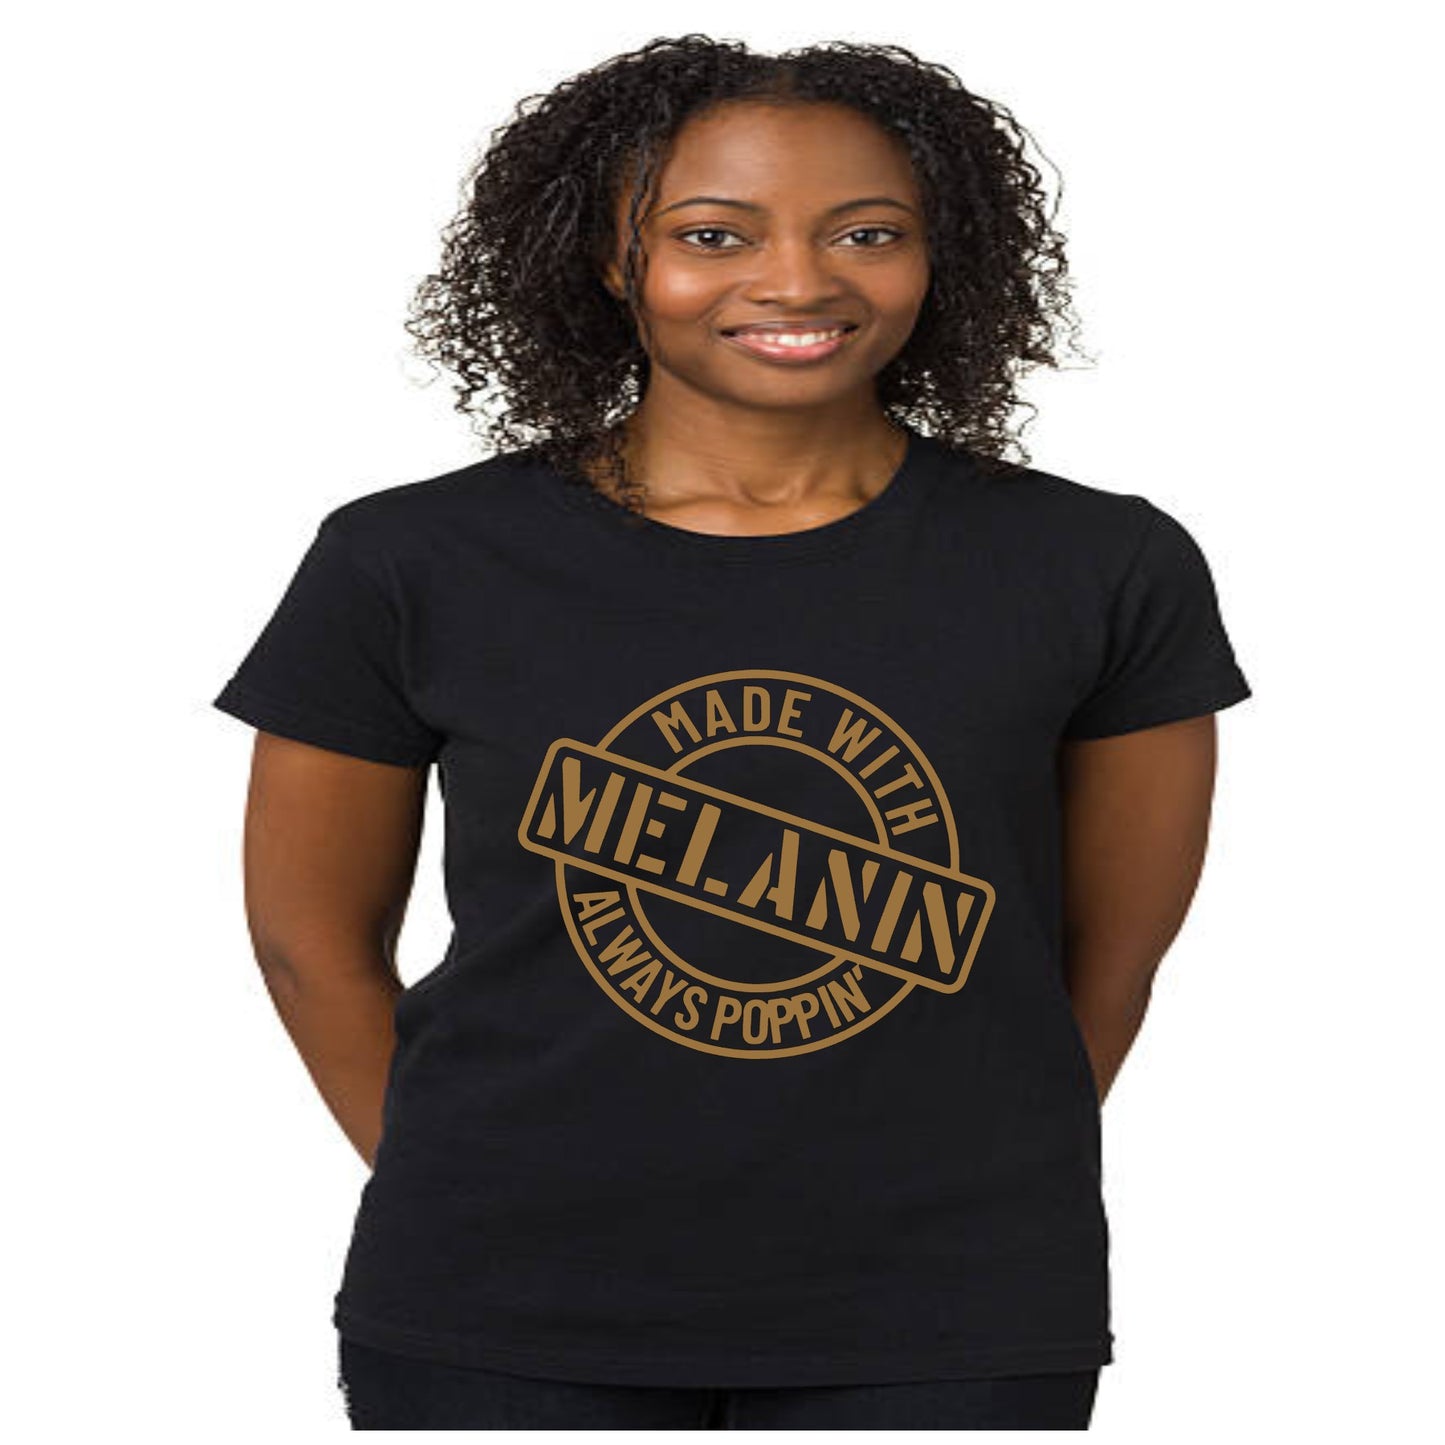 MELANIN IS POOPIN TSHIRT  Message us for additional colors or customizations. Contact us form at the bottom of the website